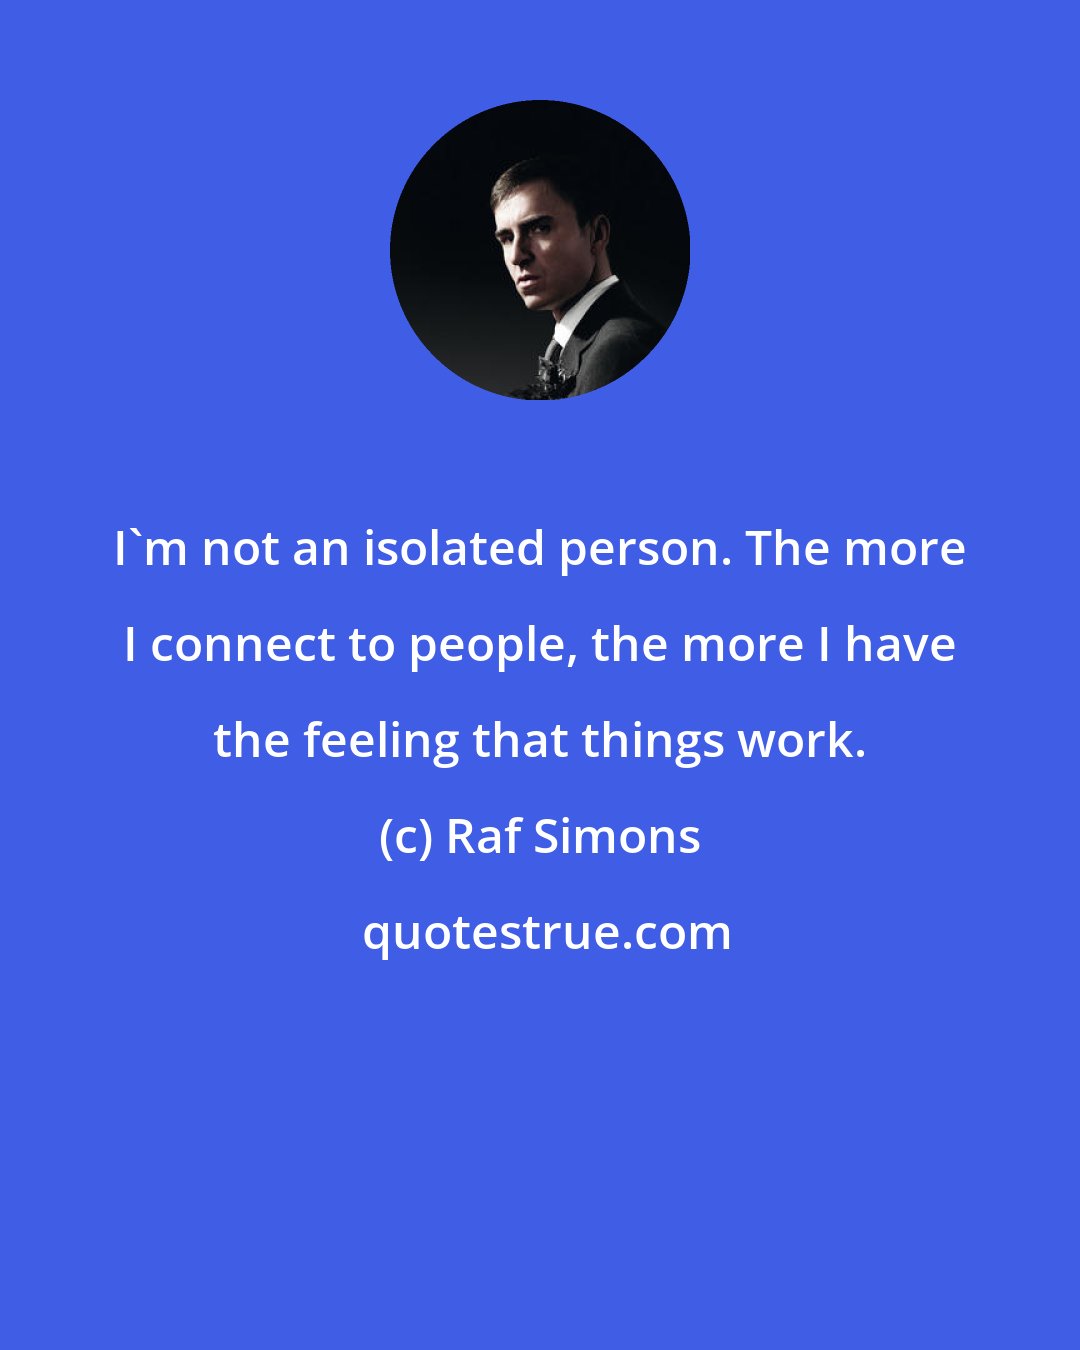 Raf Simons: I'm not an isolated person. The more I connect to people, the more I have the feeling that things work.